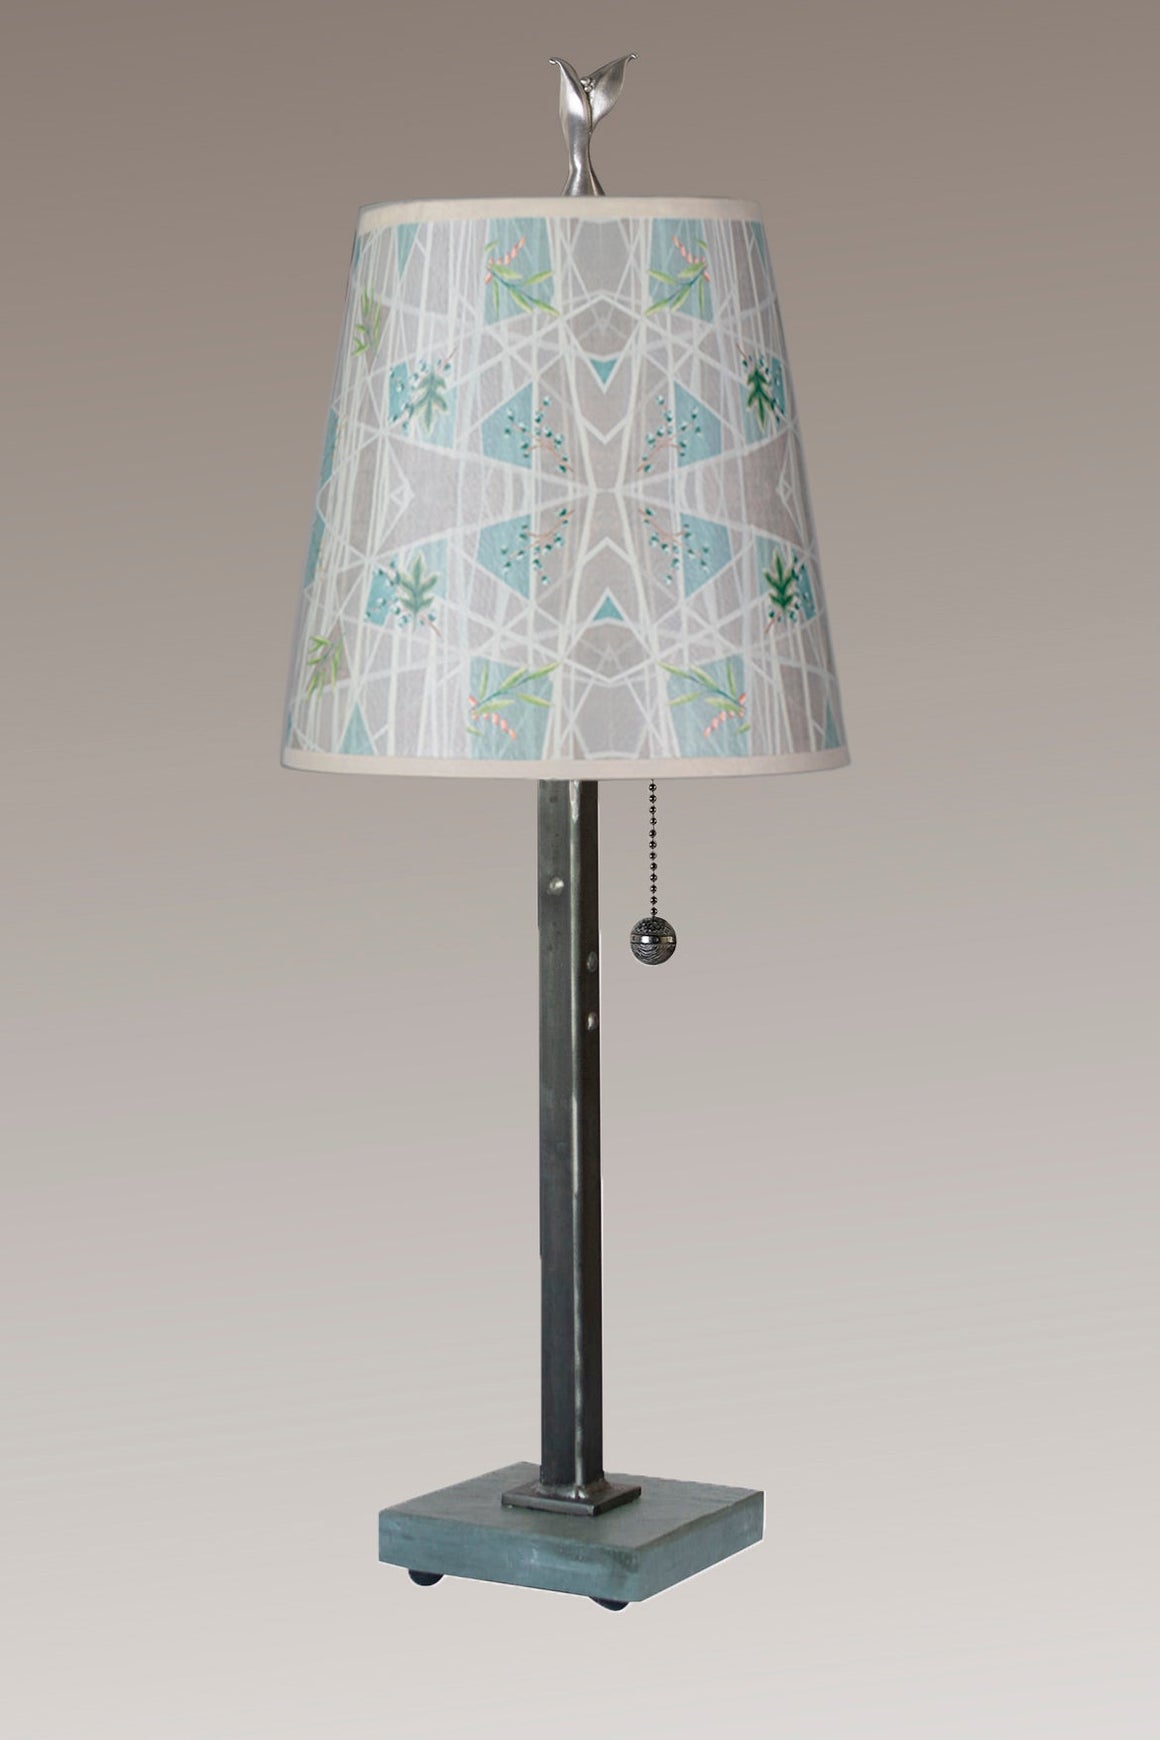 Steel Table Lamp with Small Drum Shade in Prism